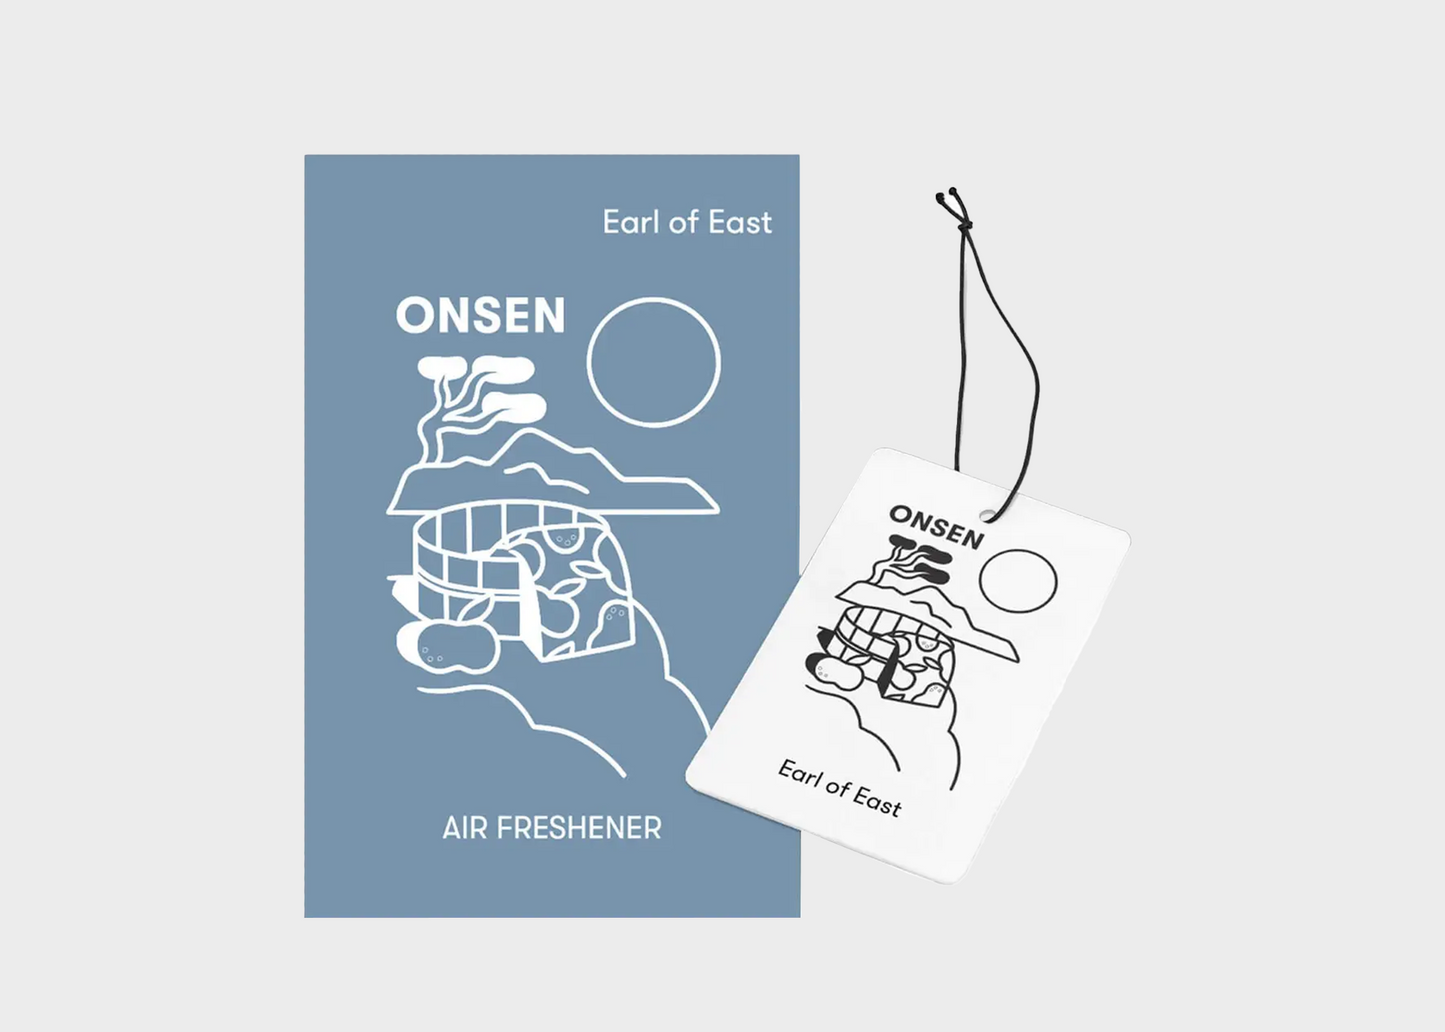 Onsen Air Freshener by Earl of East as sold by Woodland Mod.